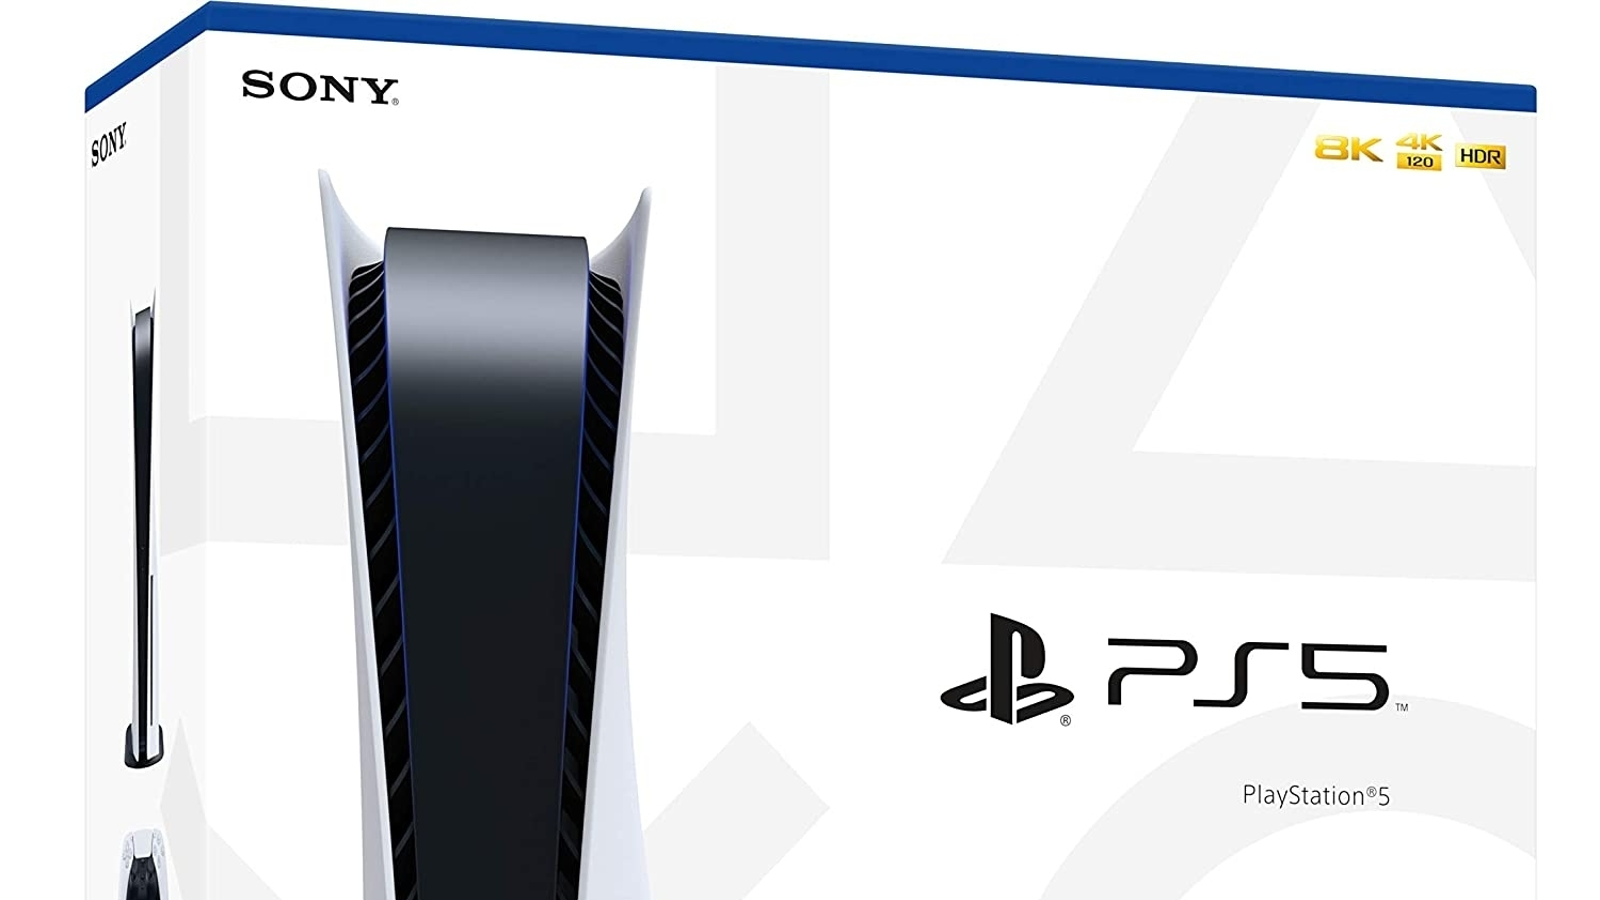 PlayStation 5 Production Reduced as PS5 Component Shortages Continue